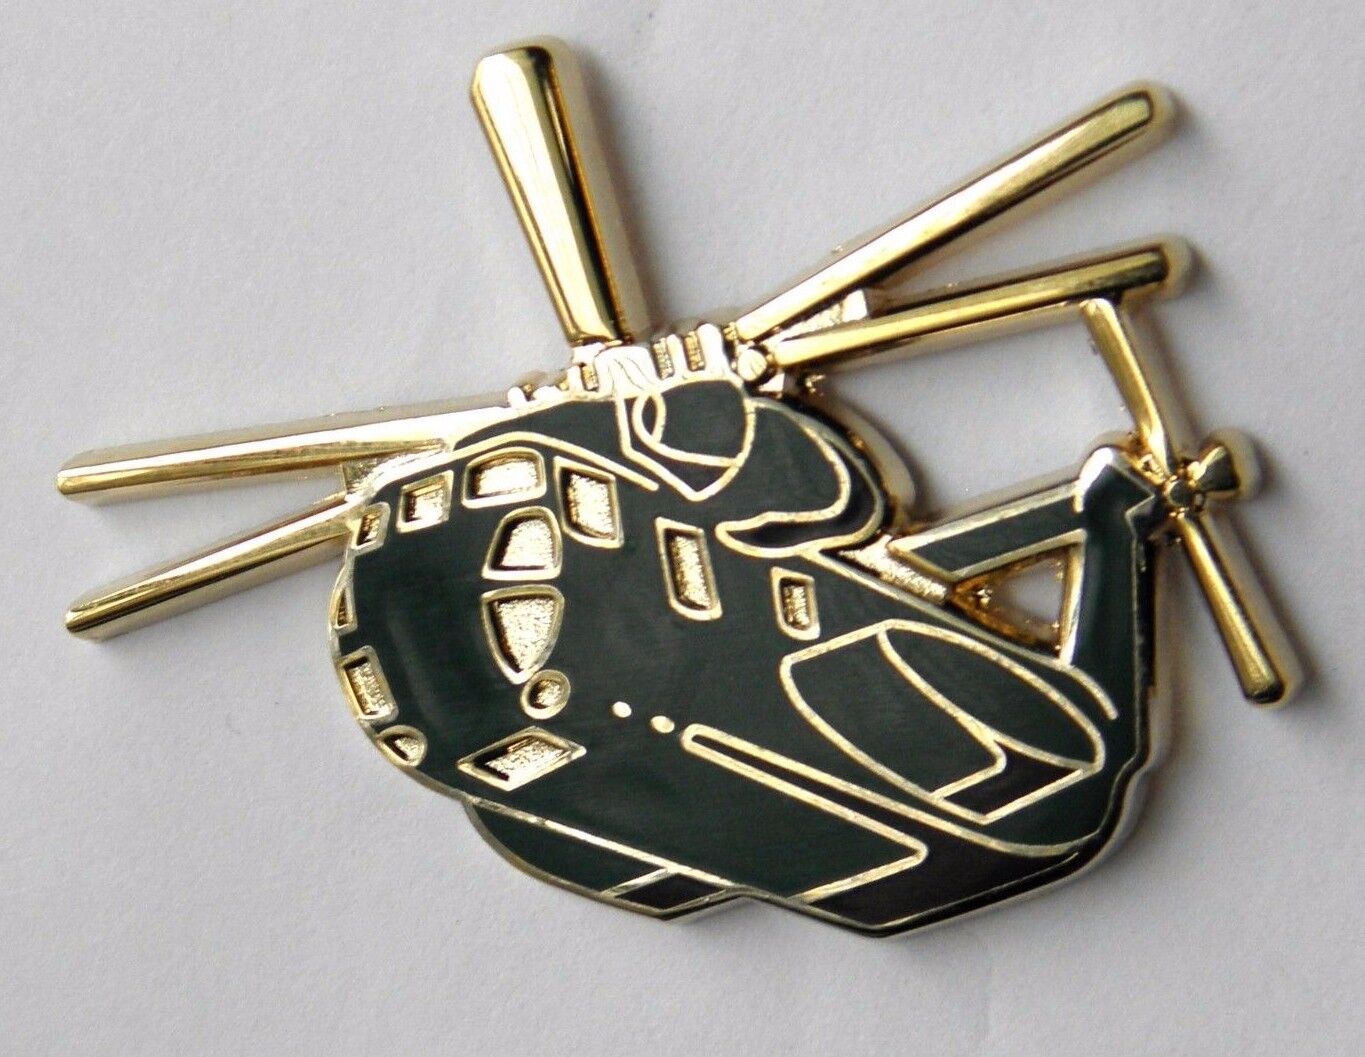 SEA STALLION SIKORSKY CH-53 TRANSPORTATION HELICOPTER LAPEL PIN BADGE 1.75 INCH